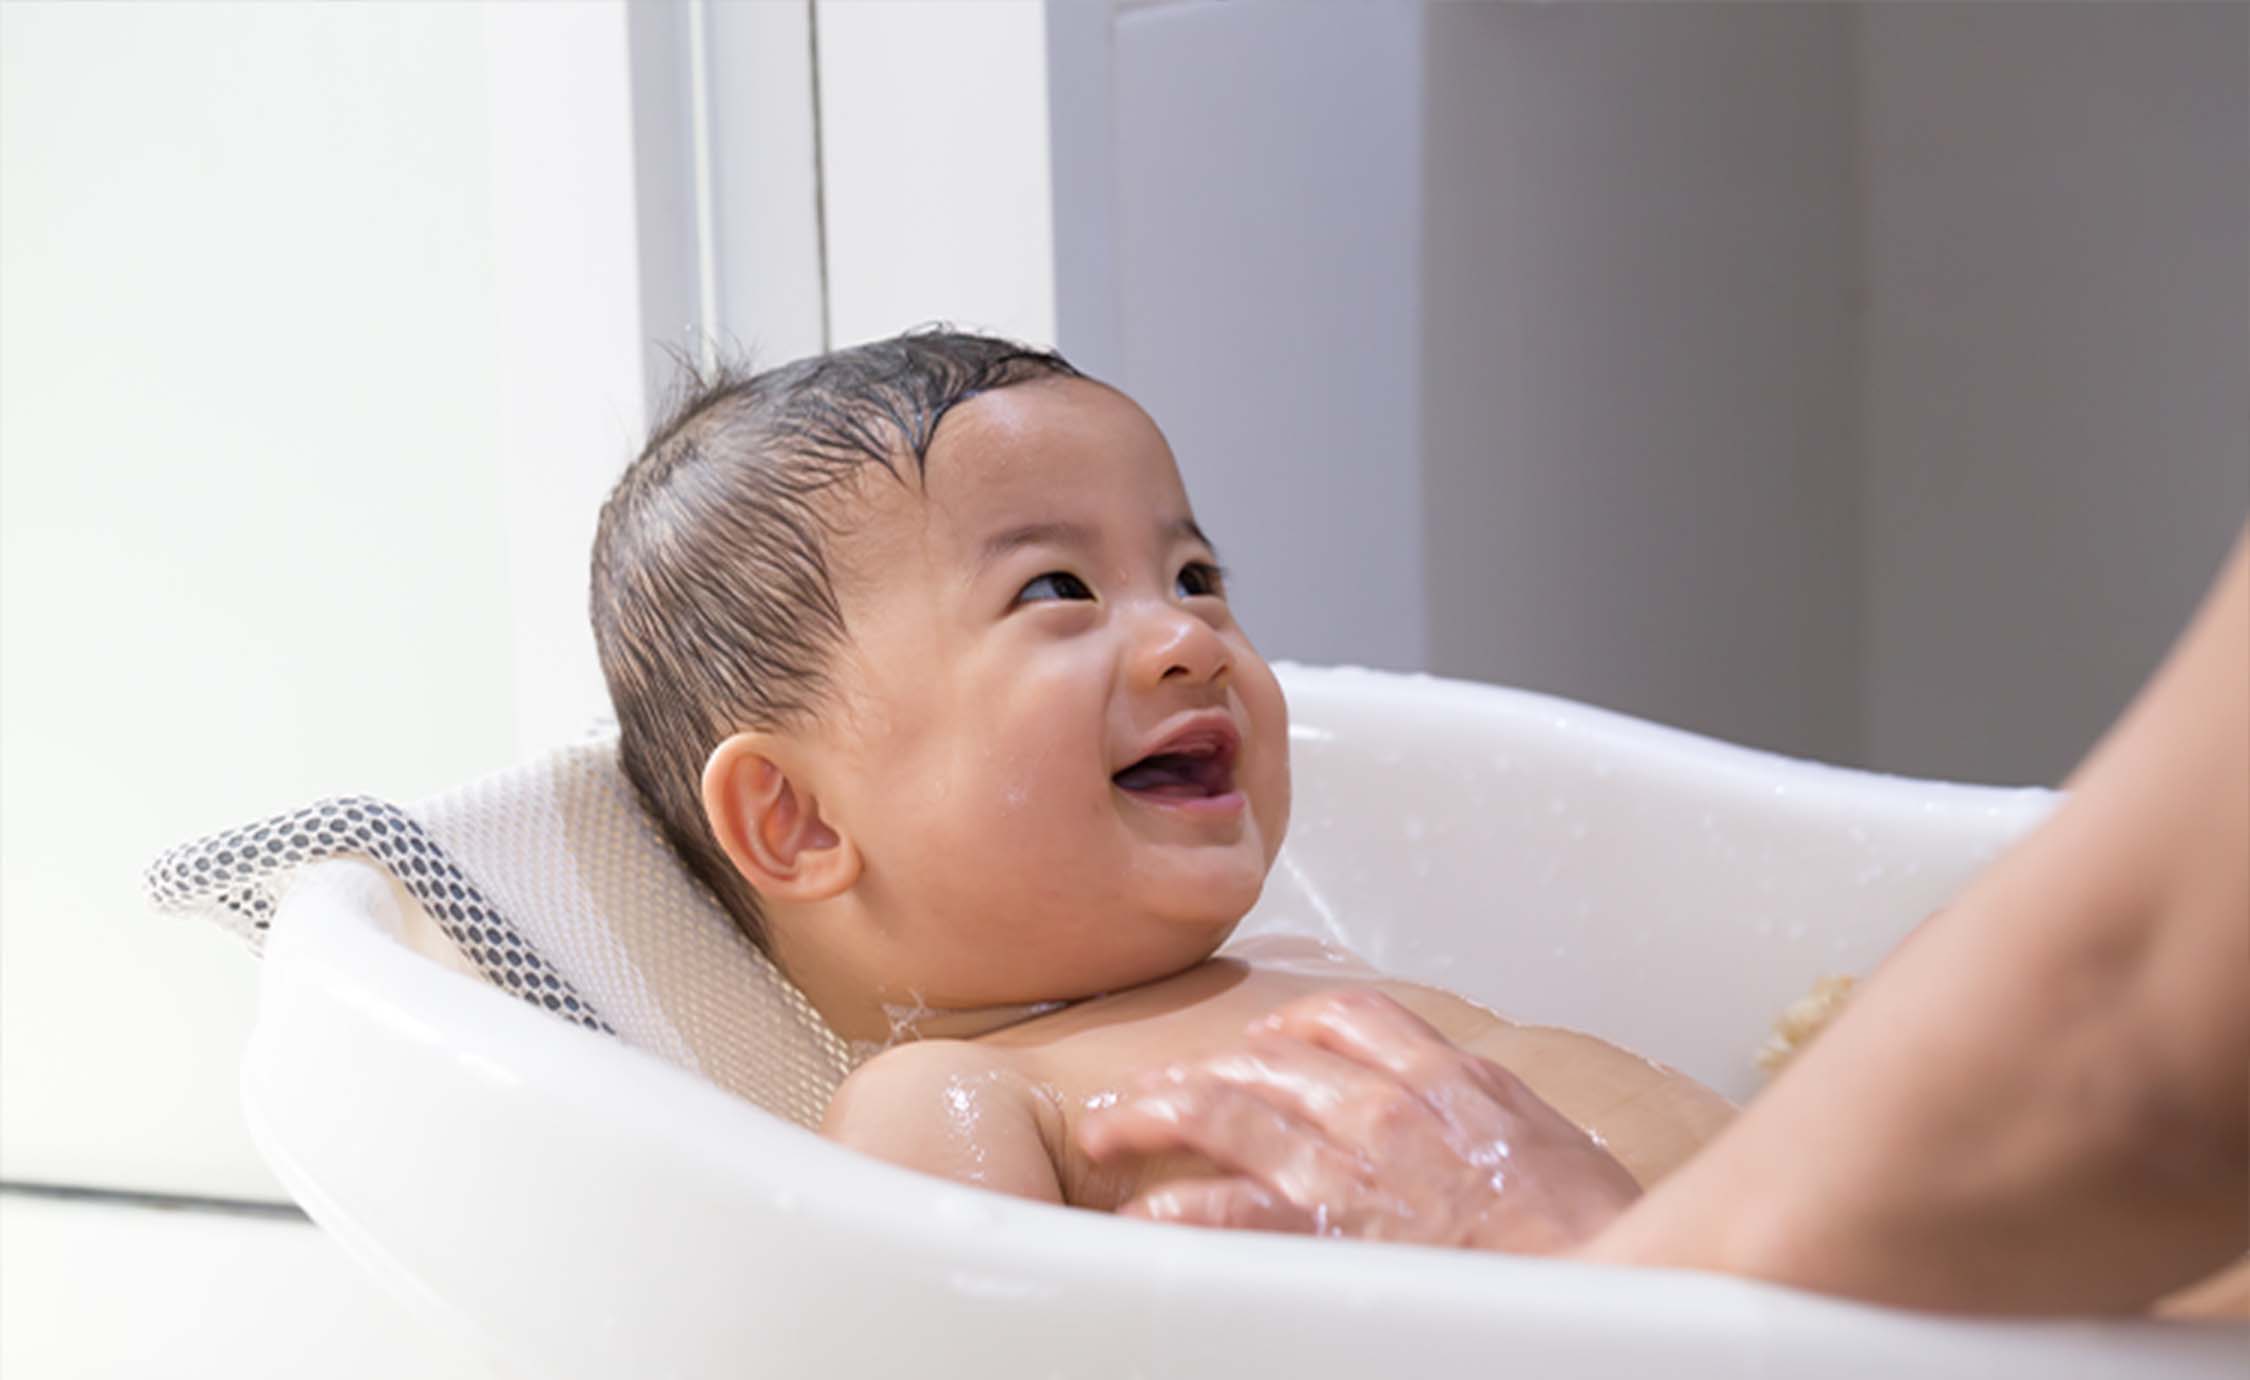 Baby laughing in bath